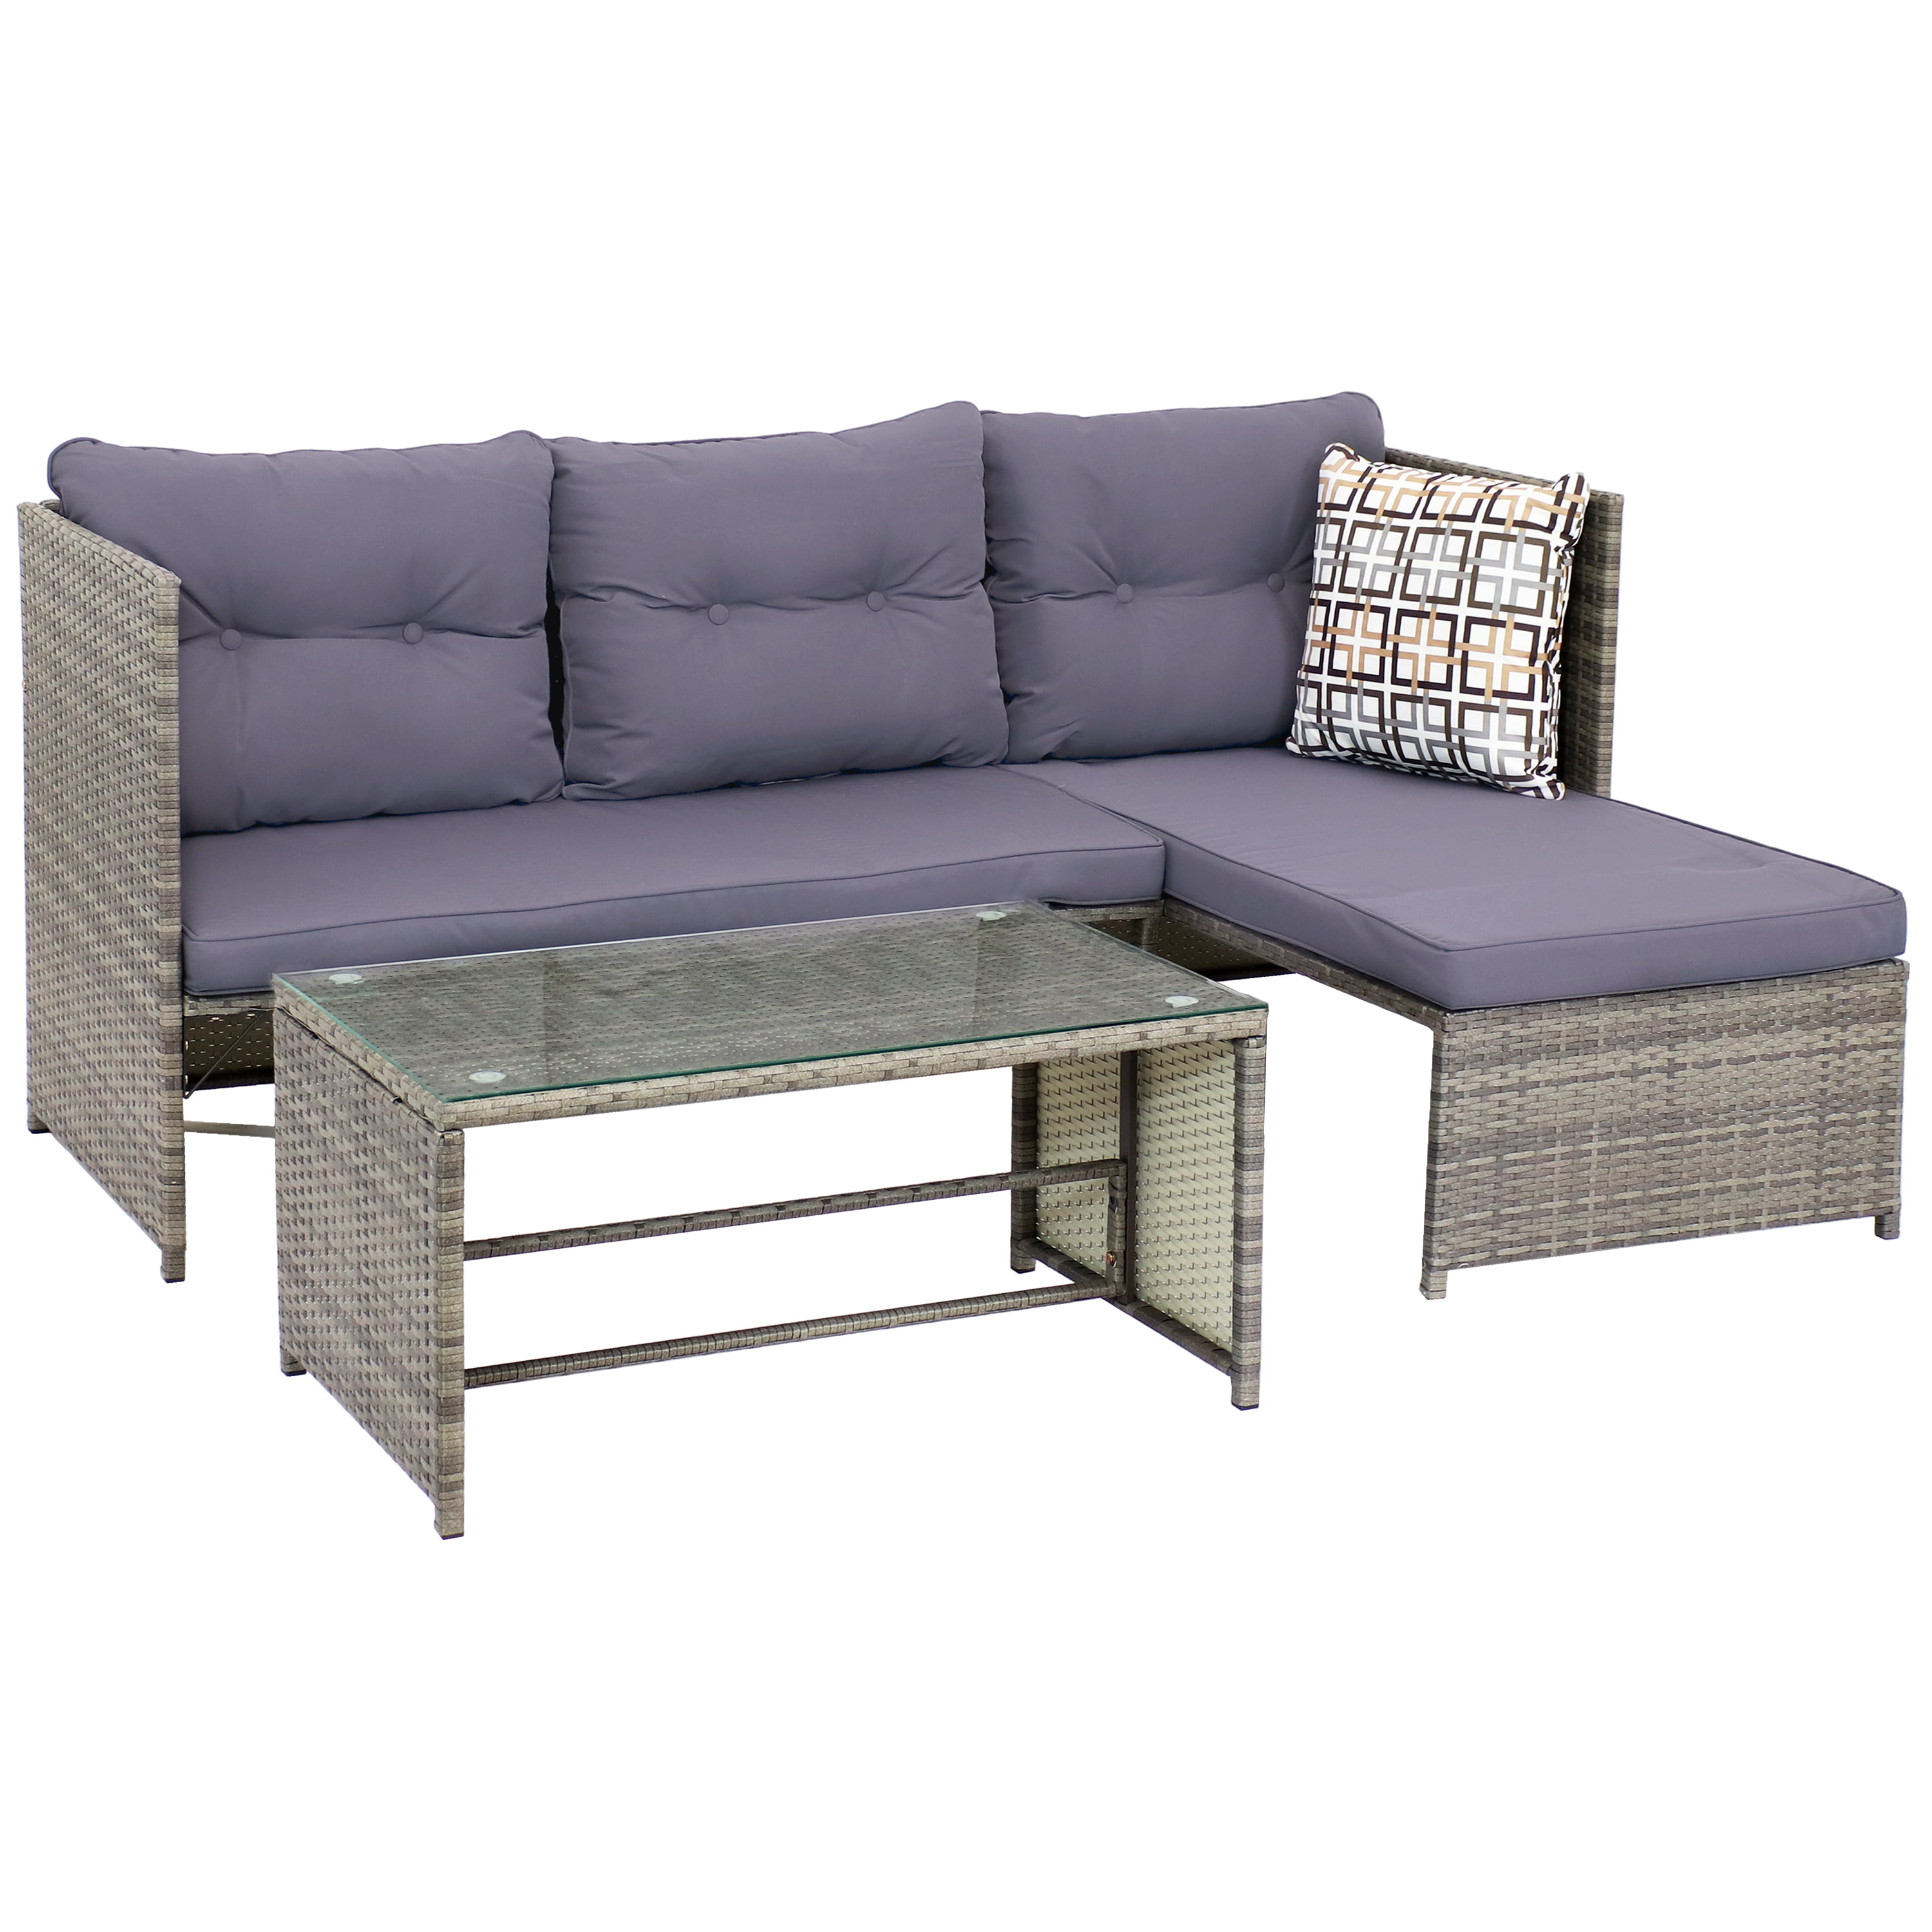 Sunnydaze Longford Outdoor Patio Sectional Sofa Set with Cushions - Charcoal - image 1 of 12